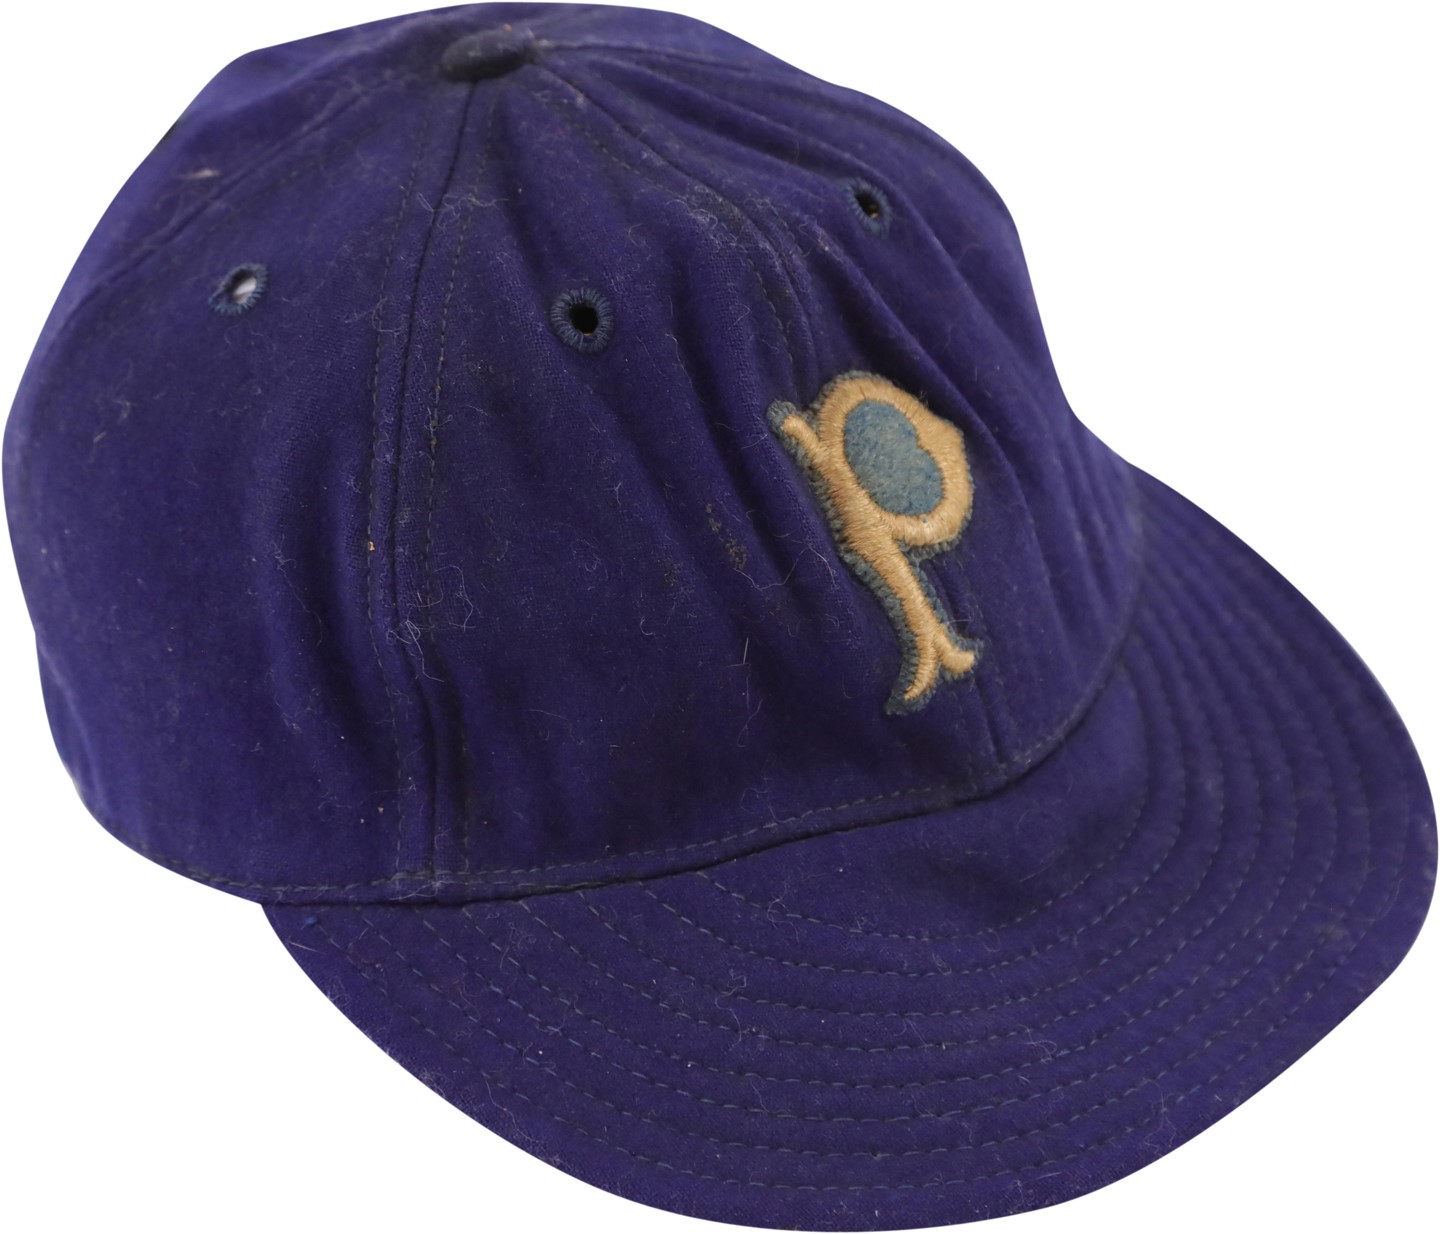 Clemente and Pittsburgh Pirates - Very Rare 1940s Pittsburgh Pirates Game Worn Hat